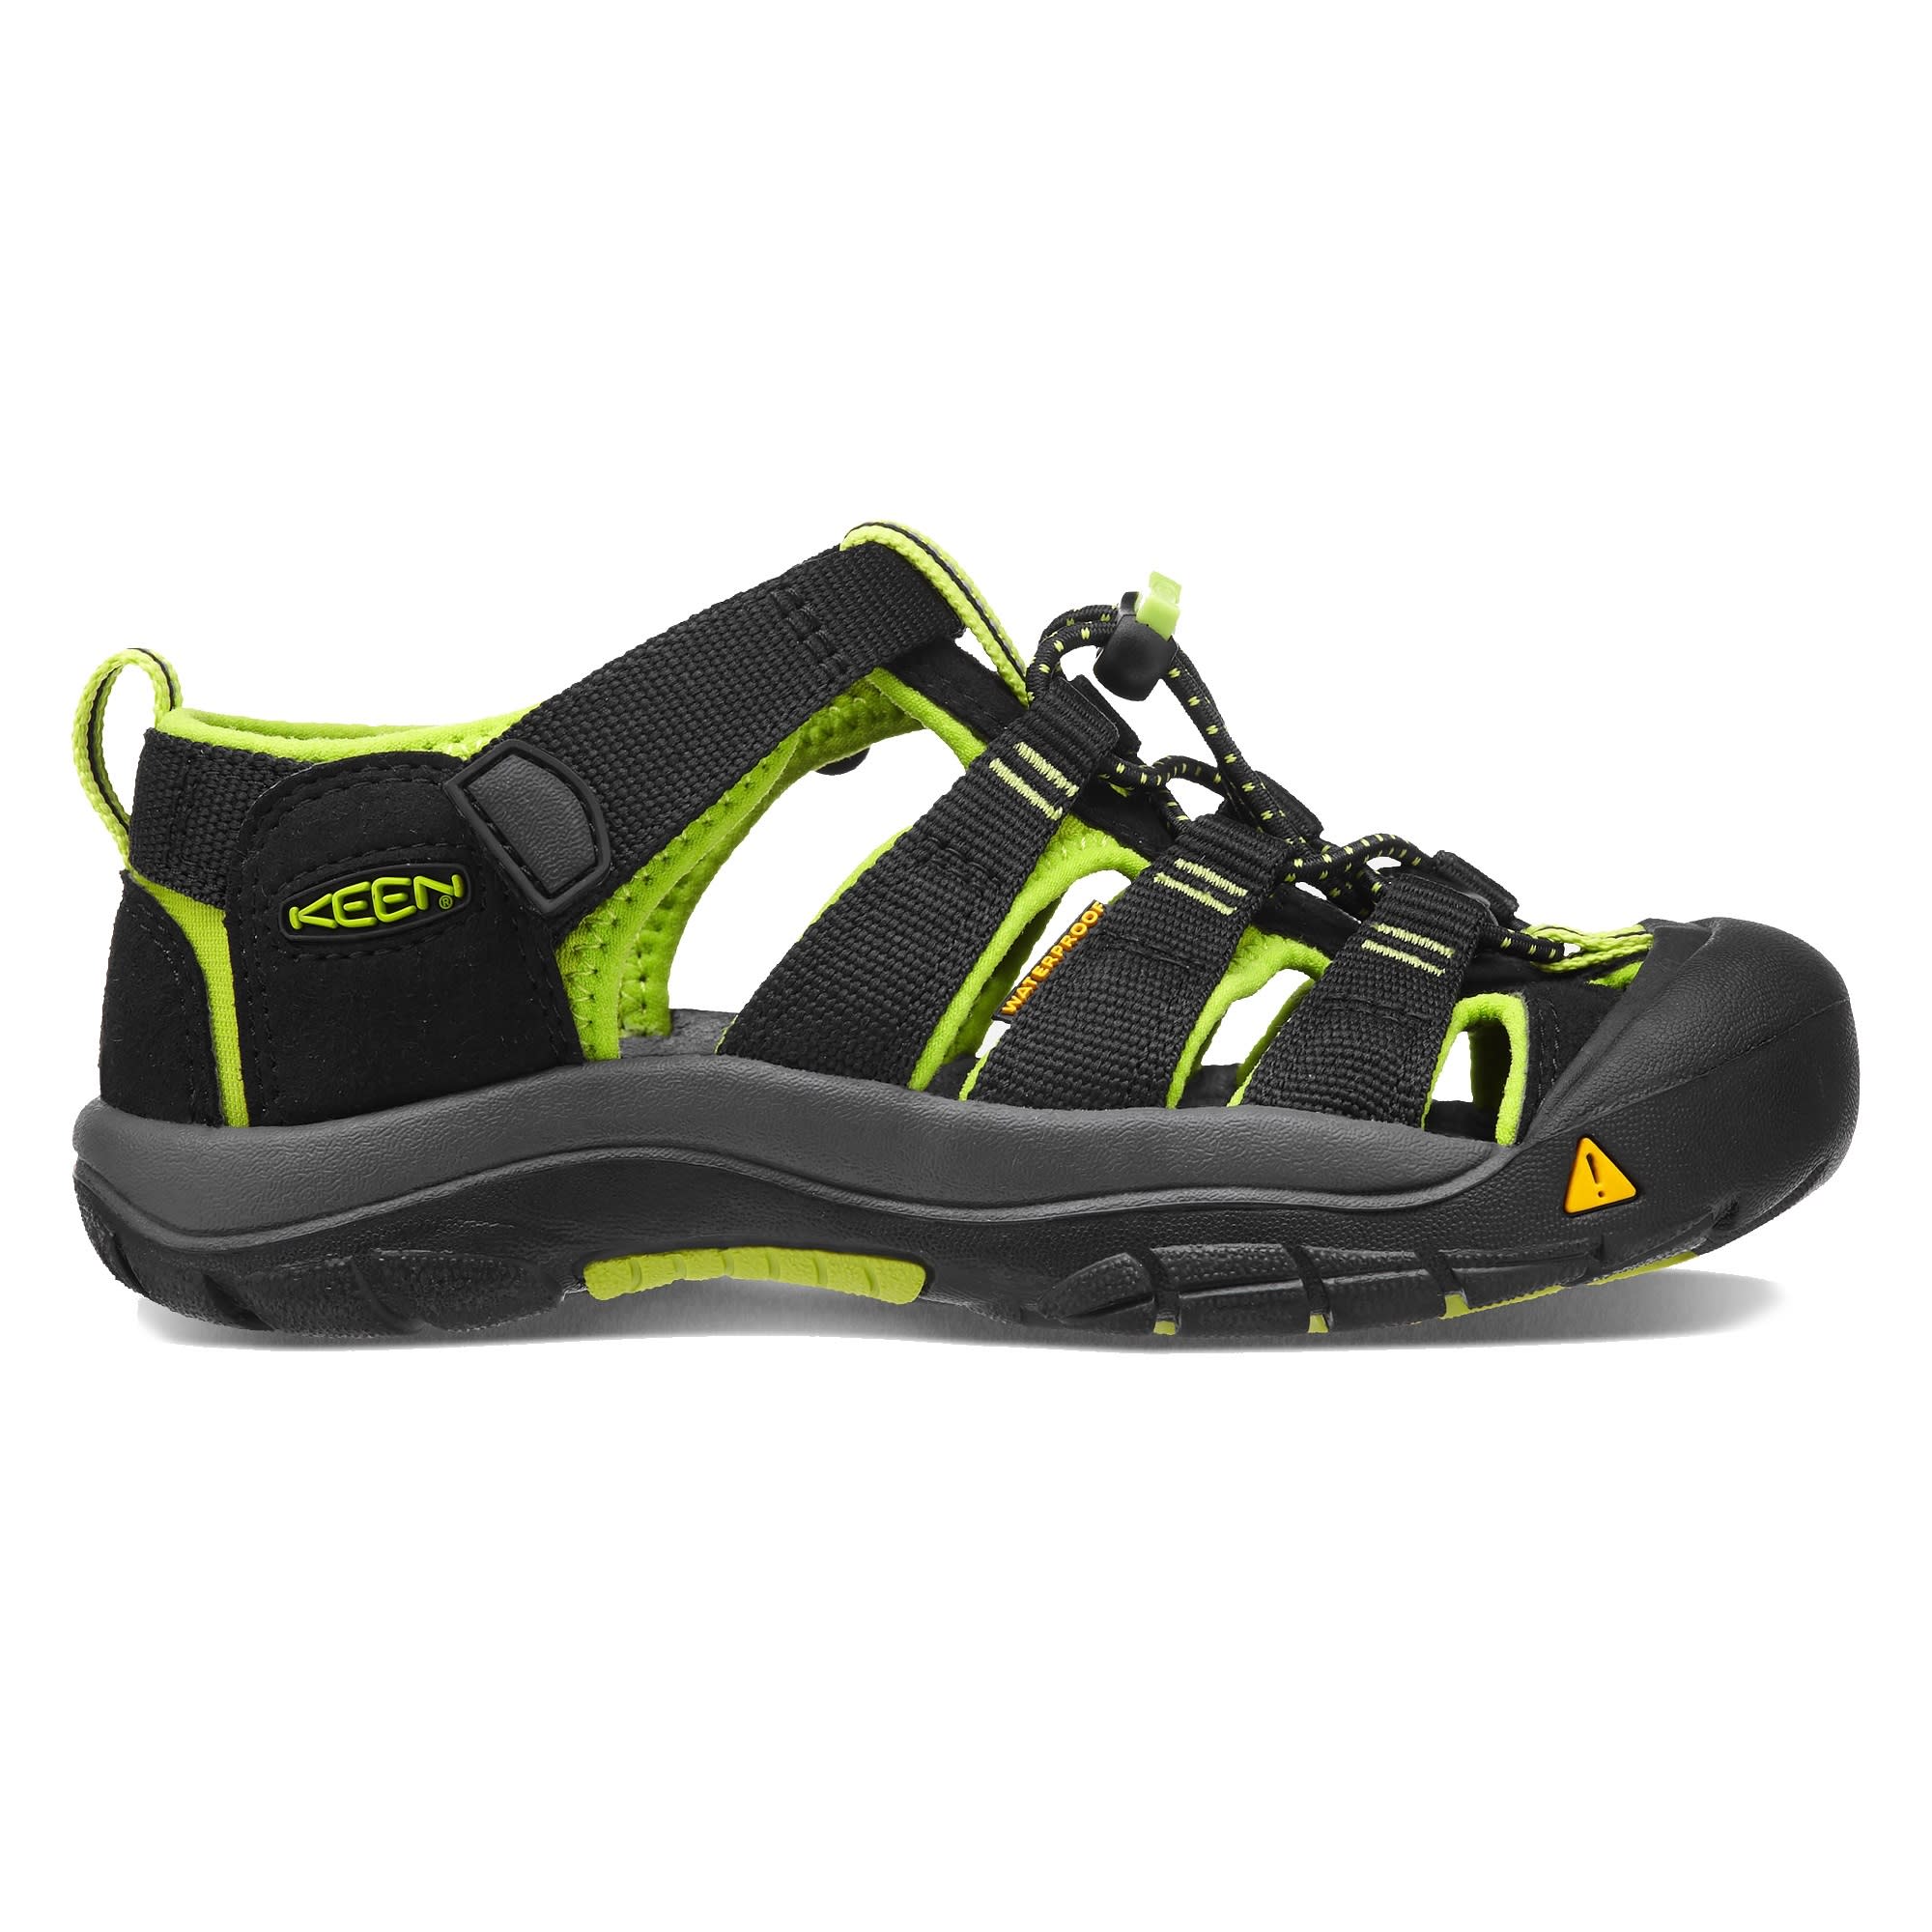 Buy Keen Newport H2 Youth from Outnorth